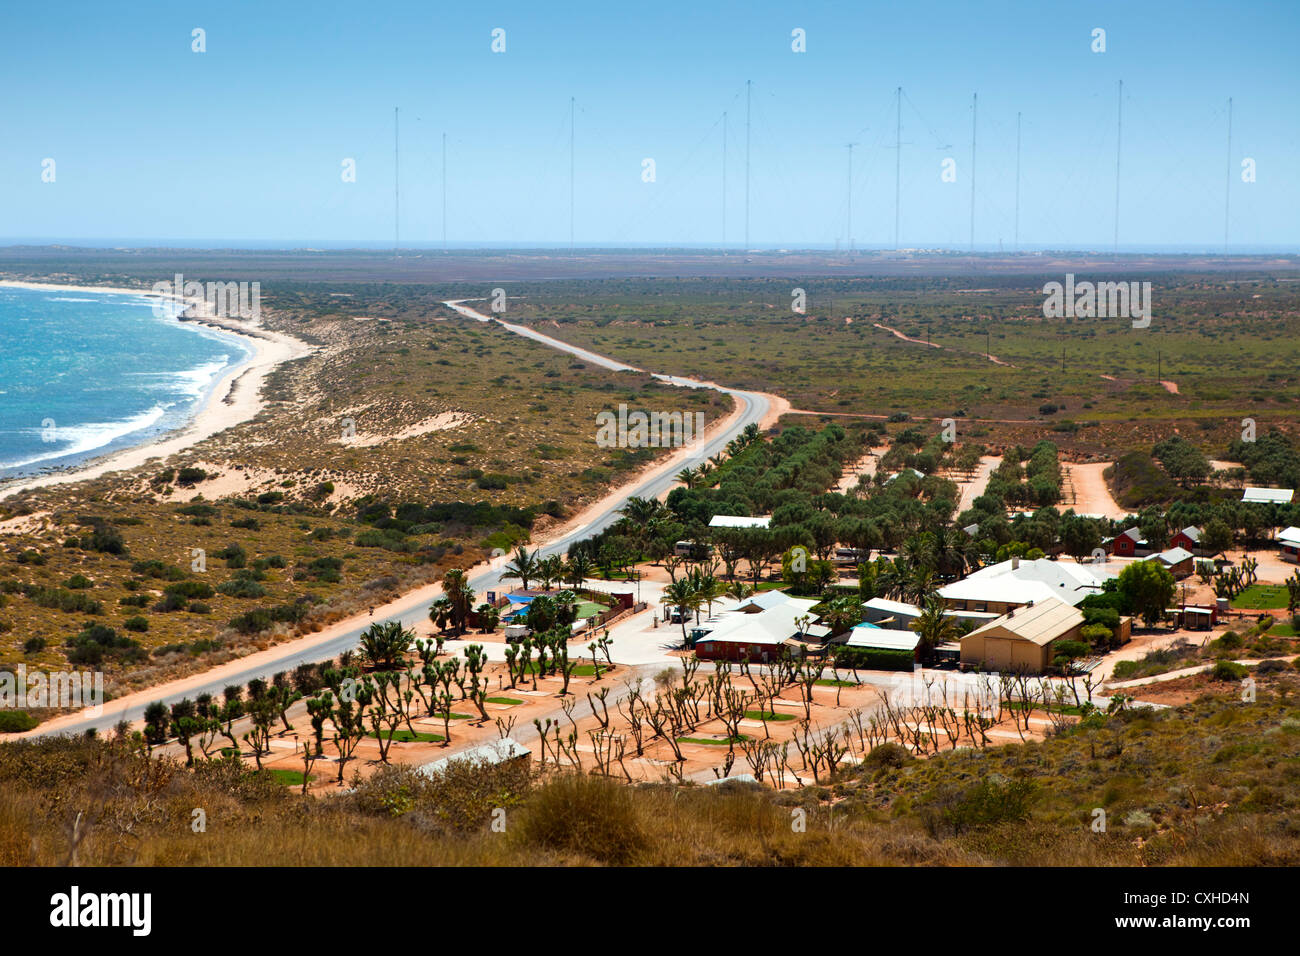 Accommodation overlooking the Indian Ocean. Exmouth, Western Australia Stock Photo